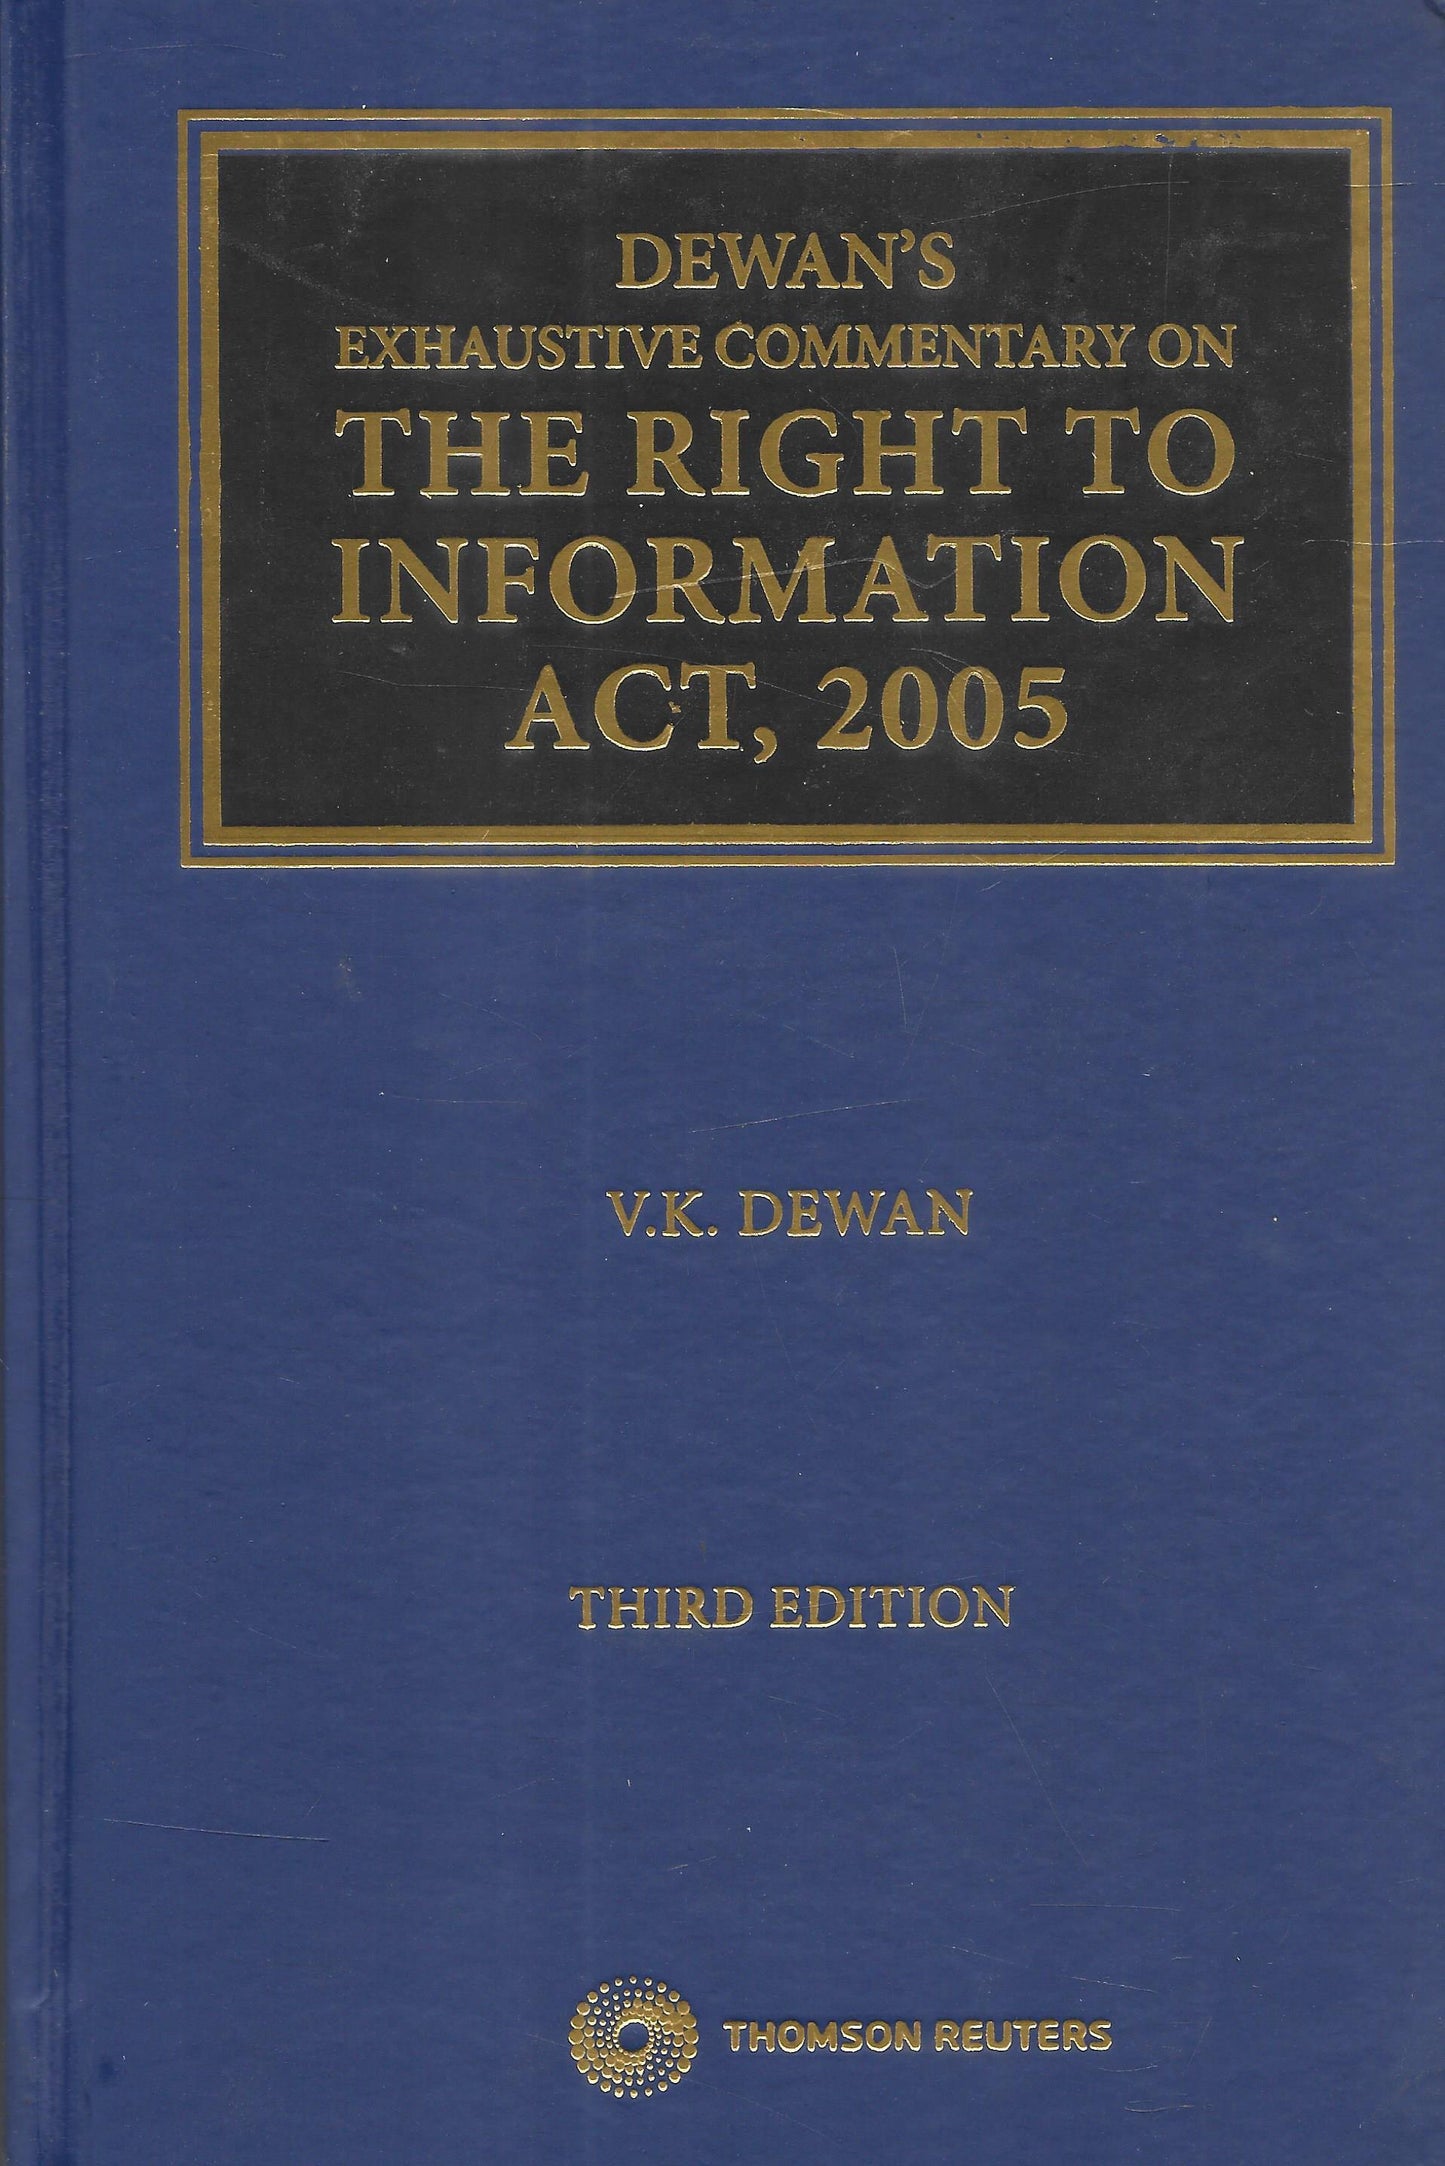 Exhaustive Commentary on the Right to Information Act, 2005